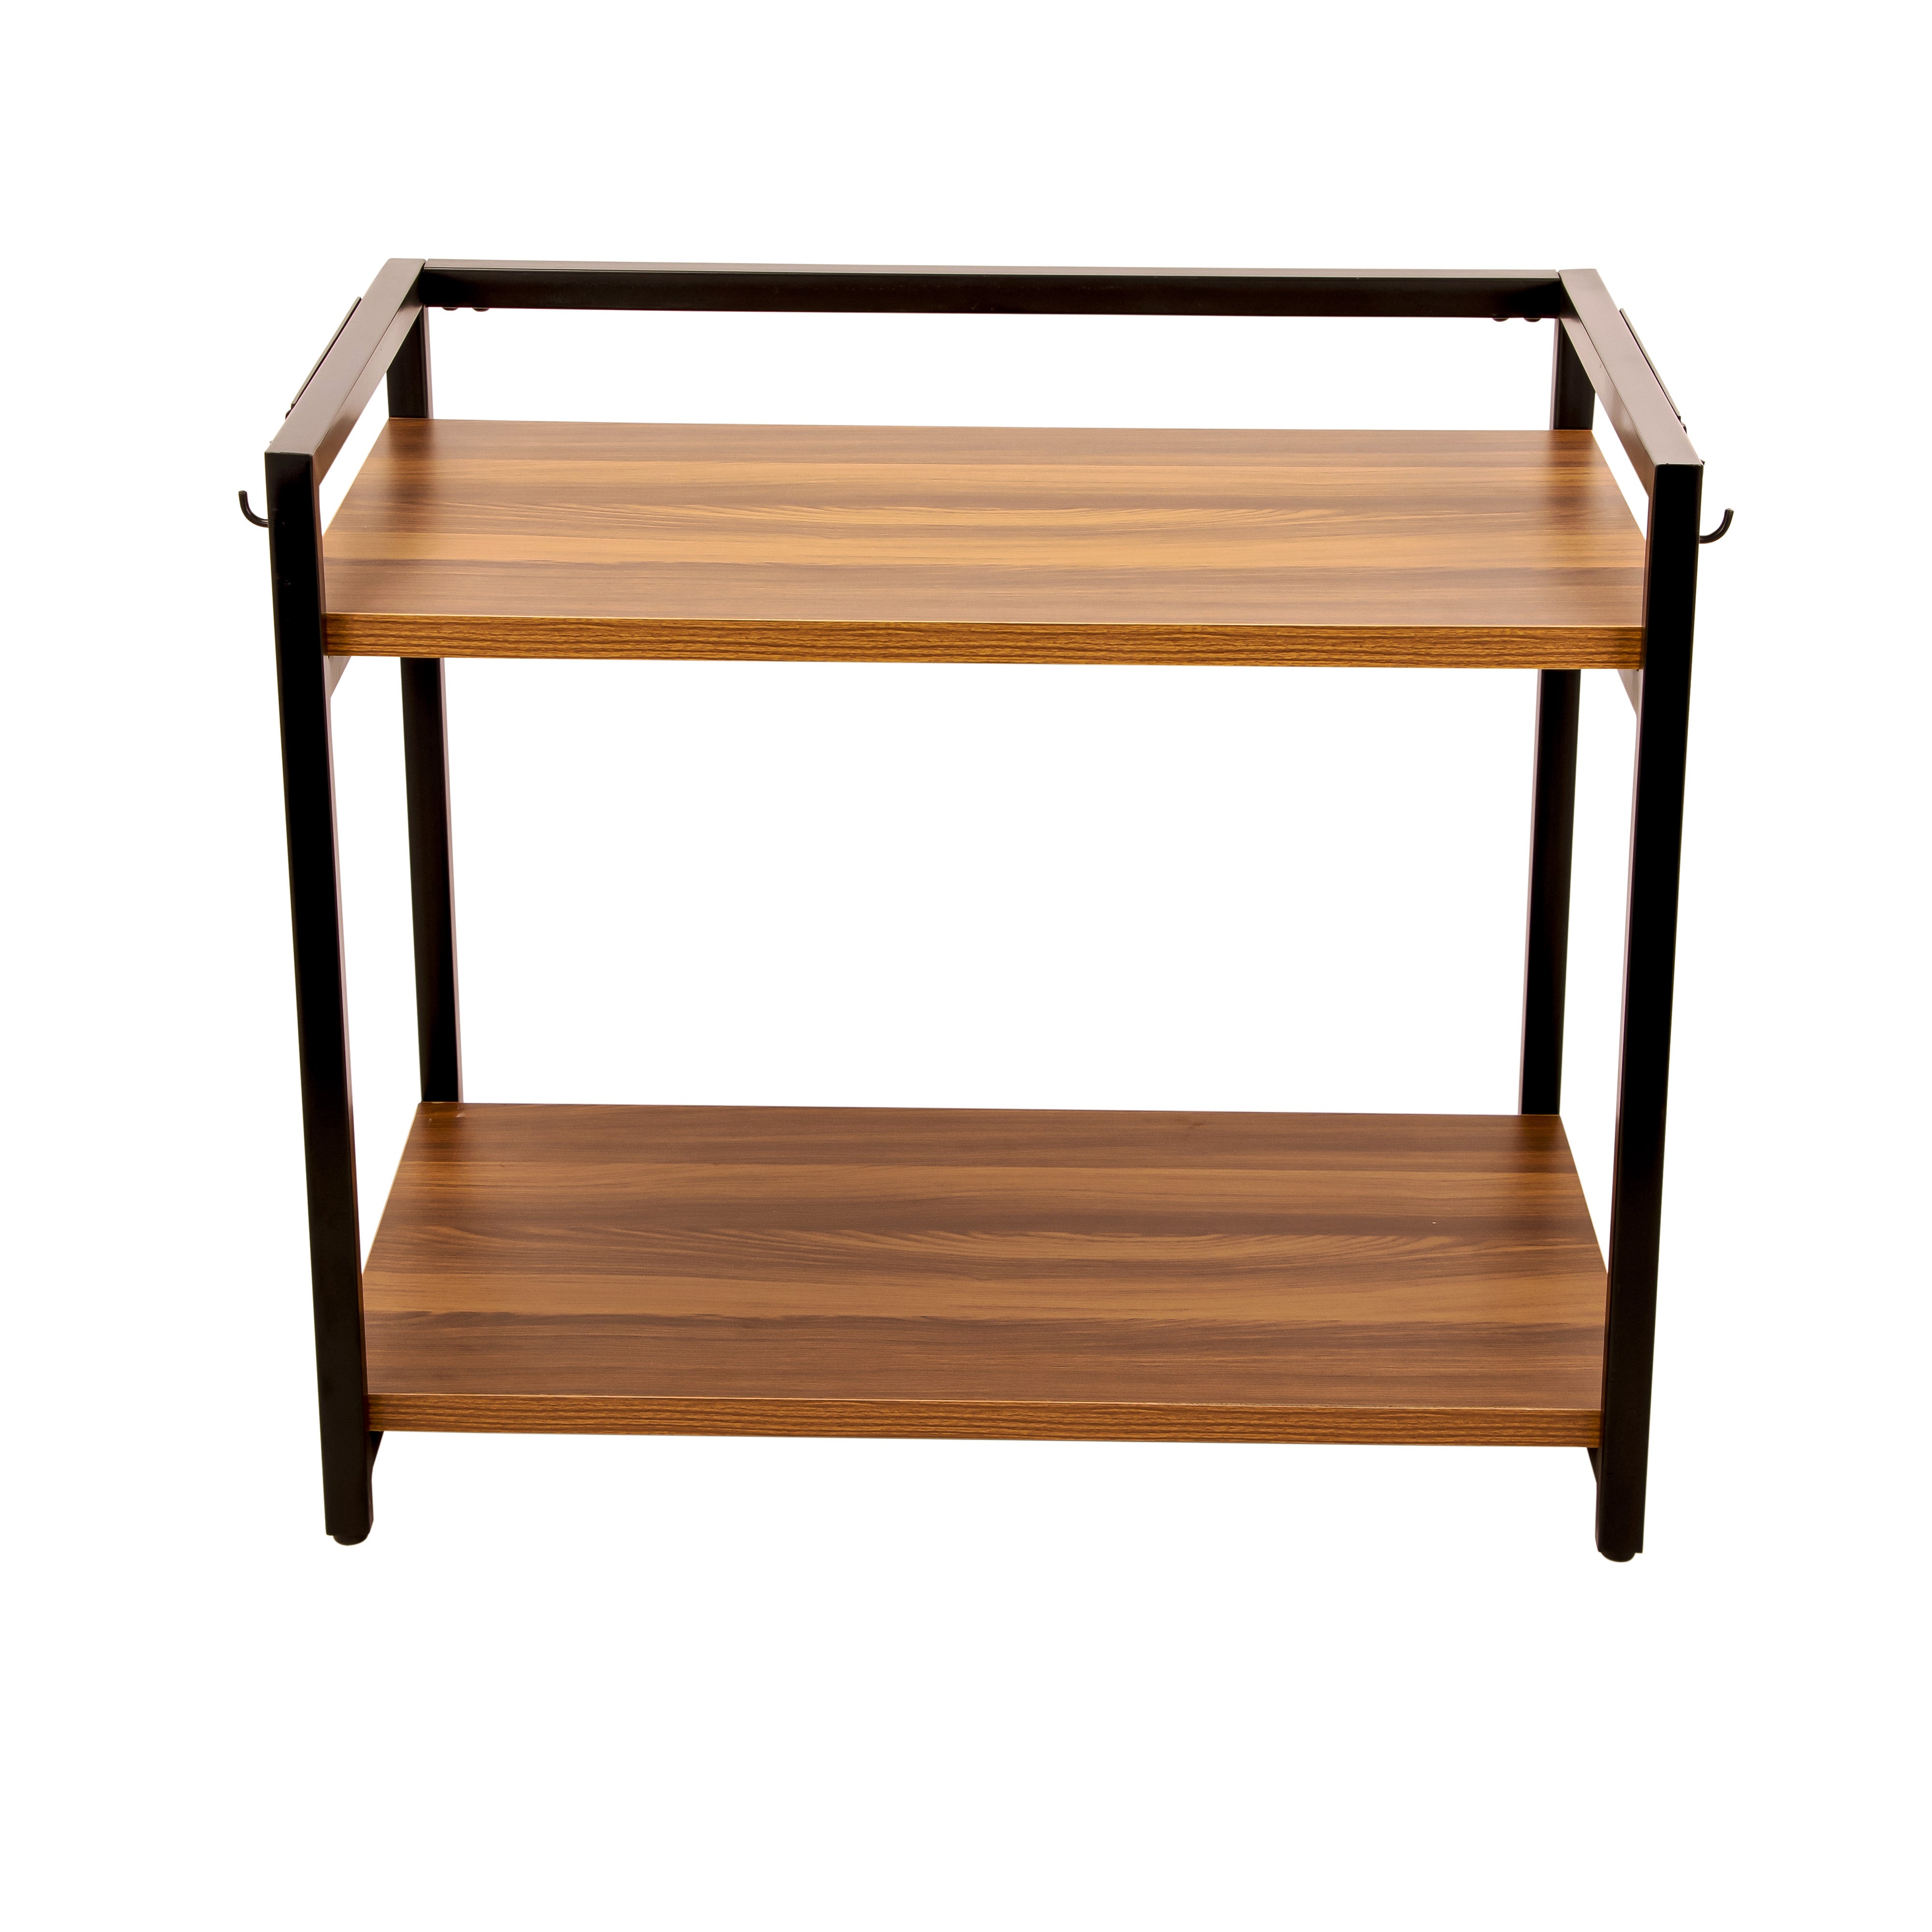 Microwave Stand - Double Platform  (Black with Honey Brown)